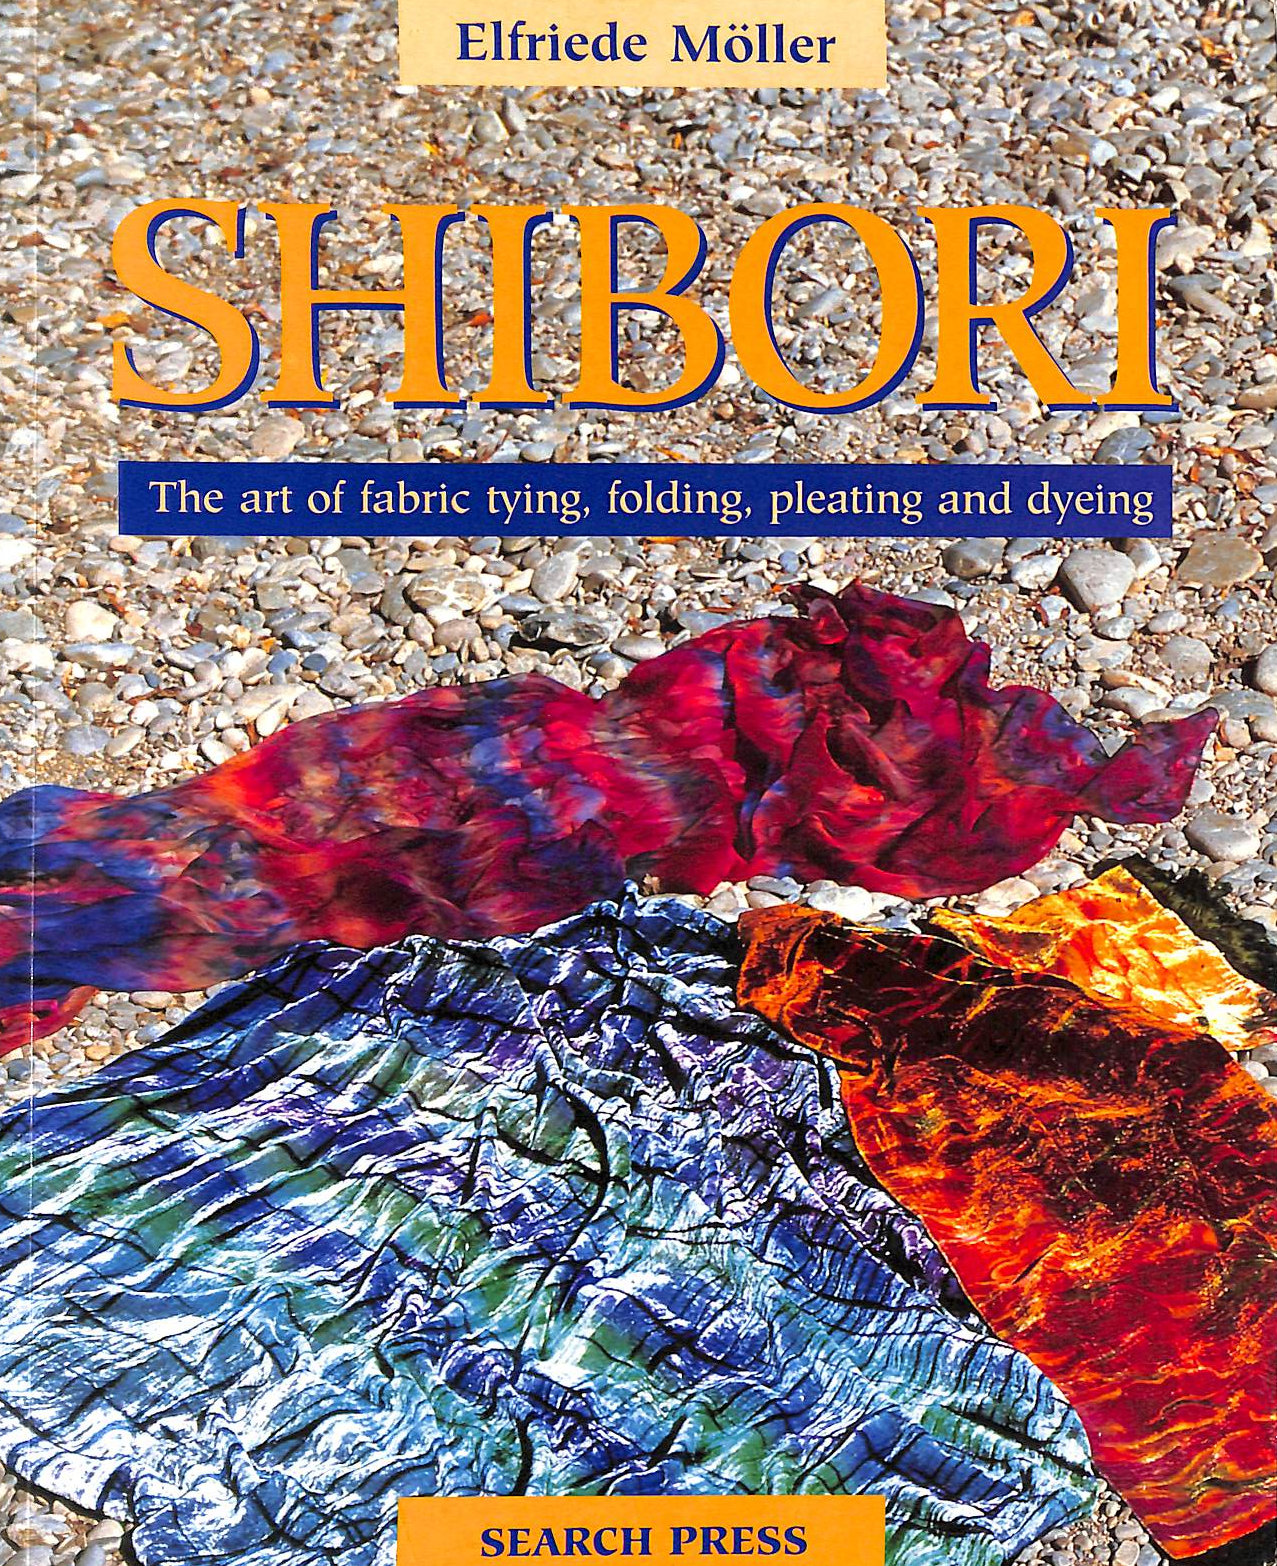 MOLLER, ELFRIEDE - Shibori: The Art of Fabric Folding, Pleating and Dyeing